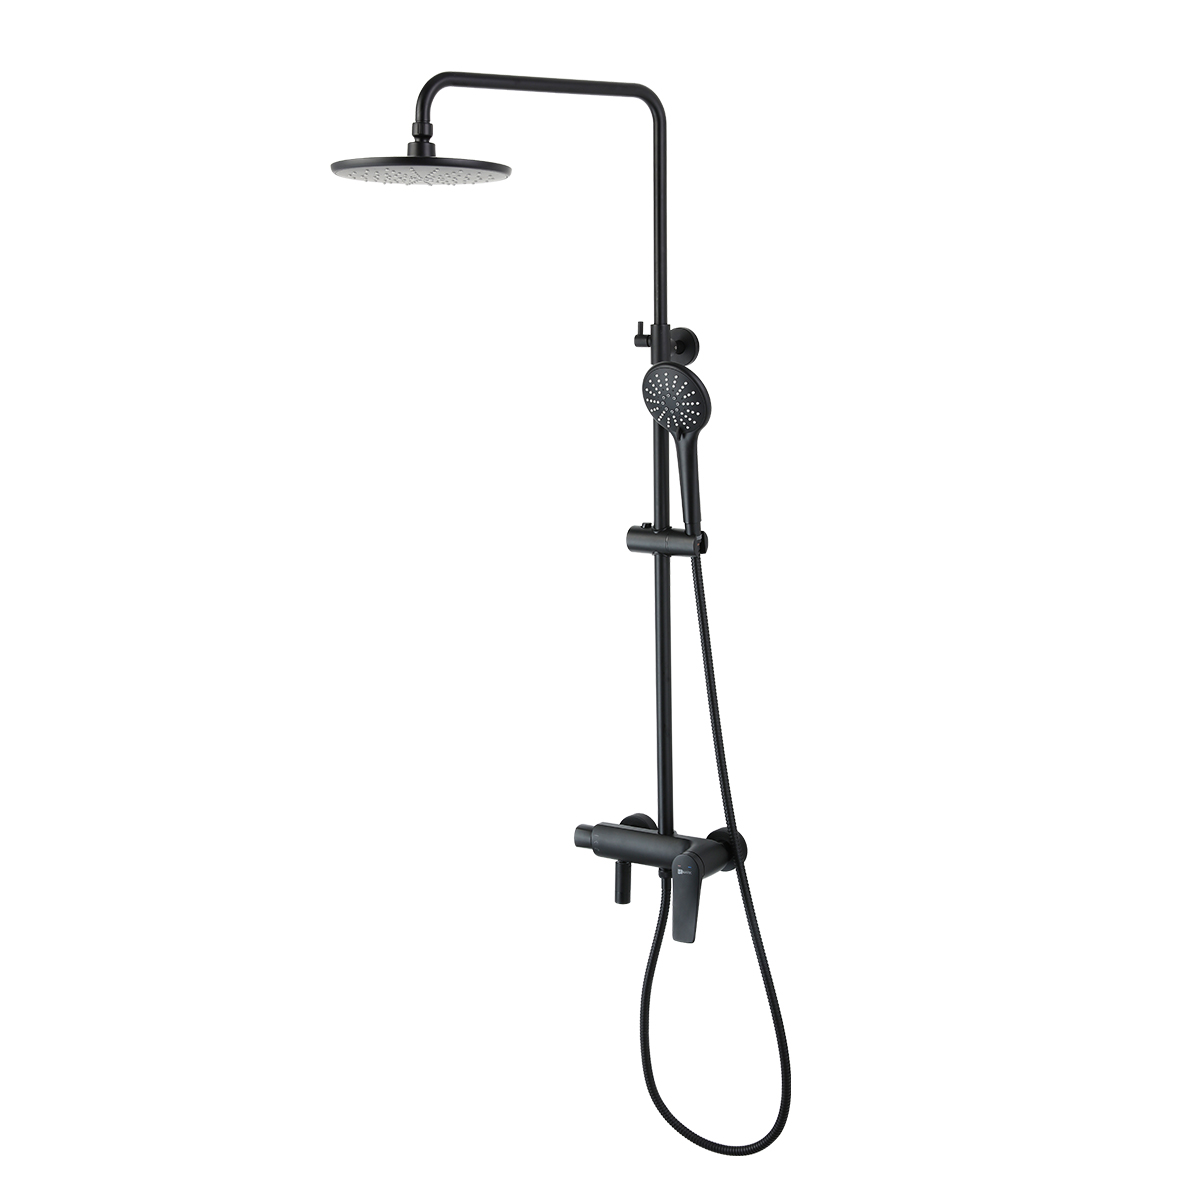 LM3762BL Bath and shower faucet with adjustable rod height, swivel spout and «Tropical rain» shower head